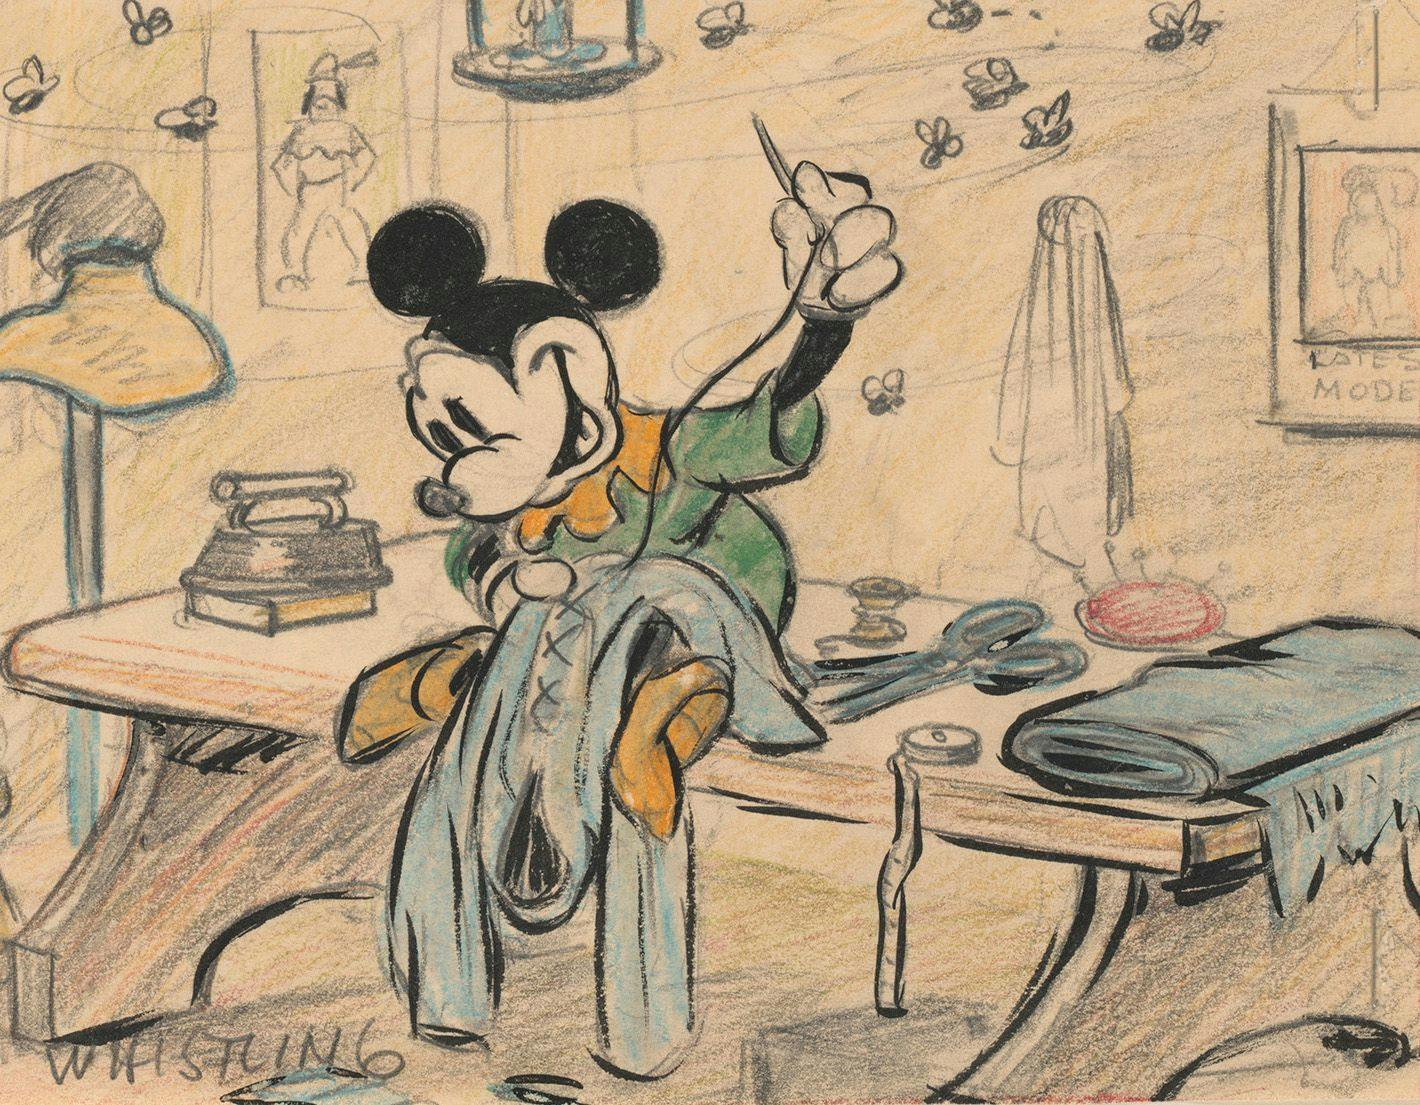 Sketch image of Mickey Mouse in the animated short film Brave little tailor from 1938